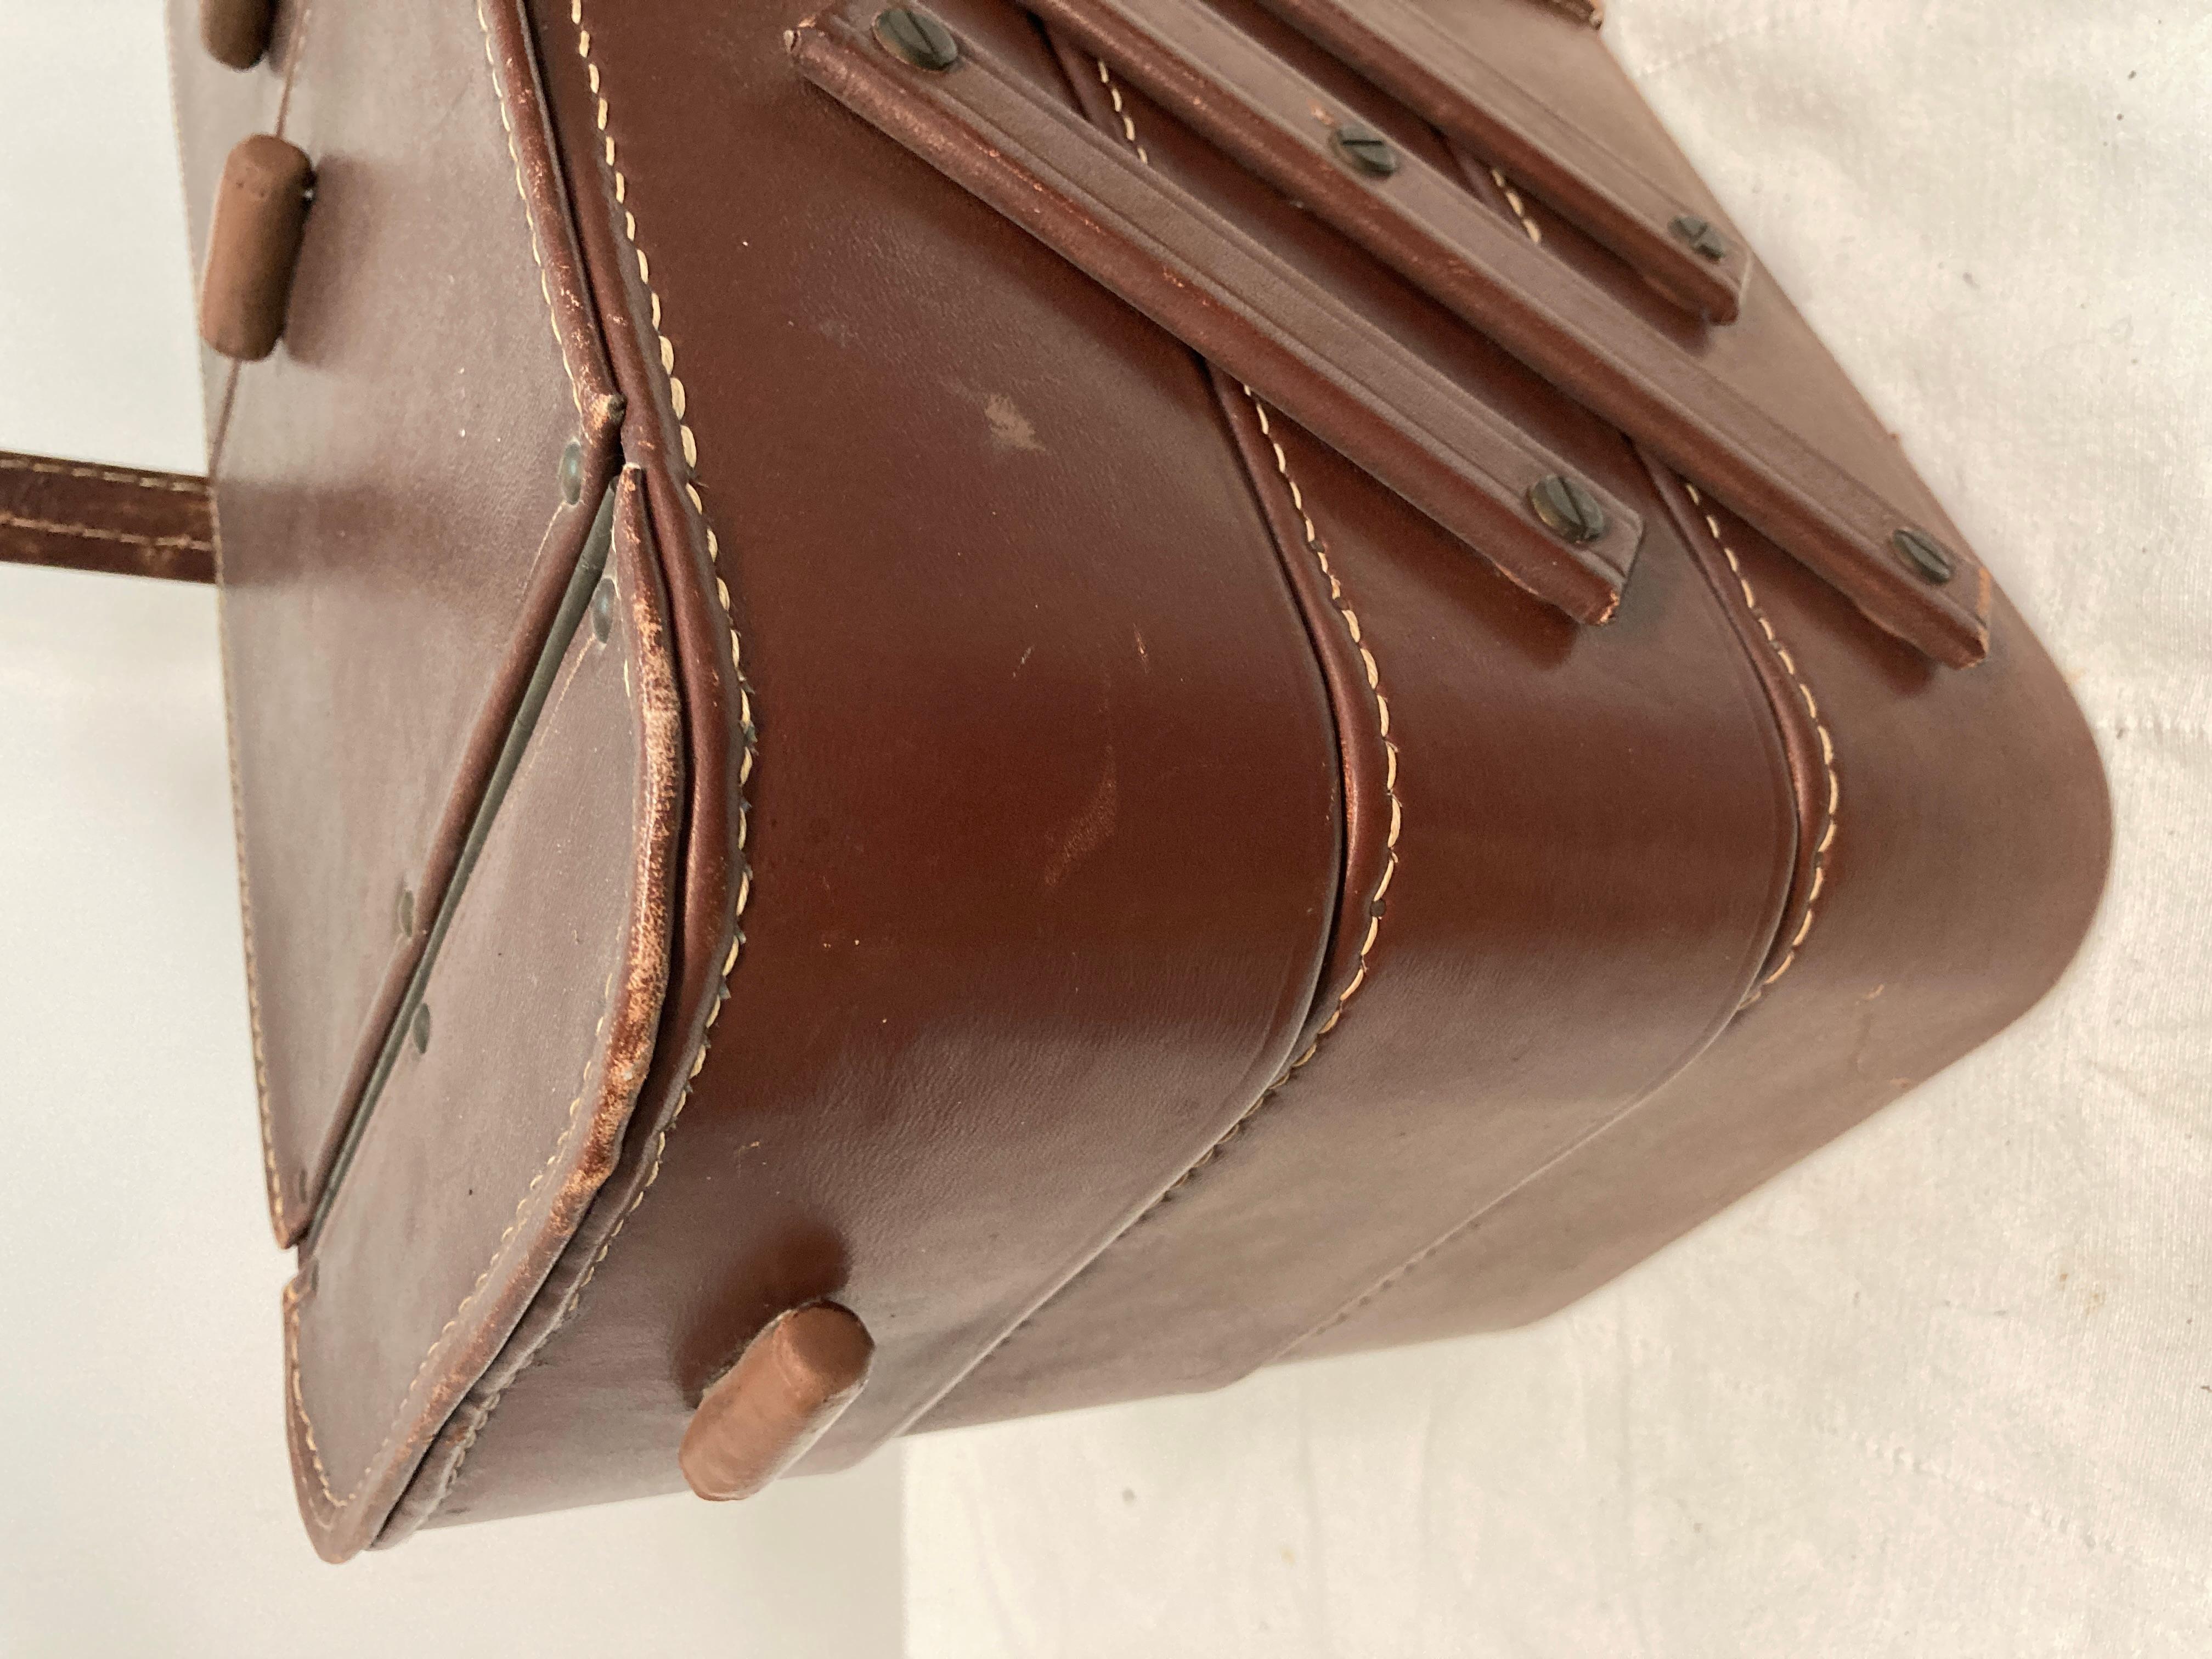 1950's Stitched leather basket 
Very rare piece
